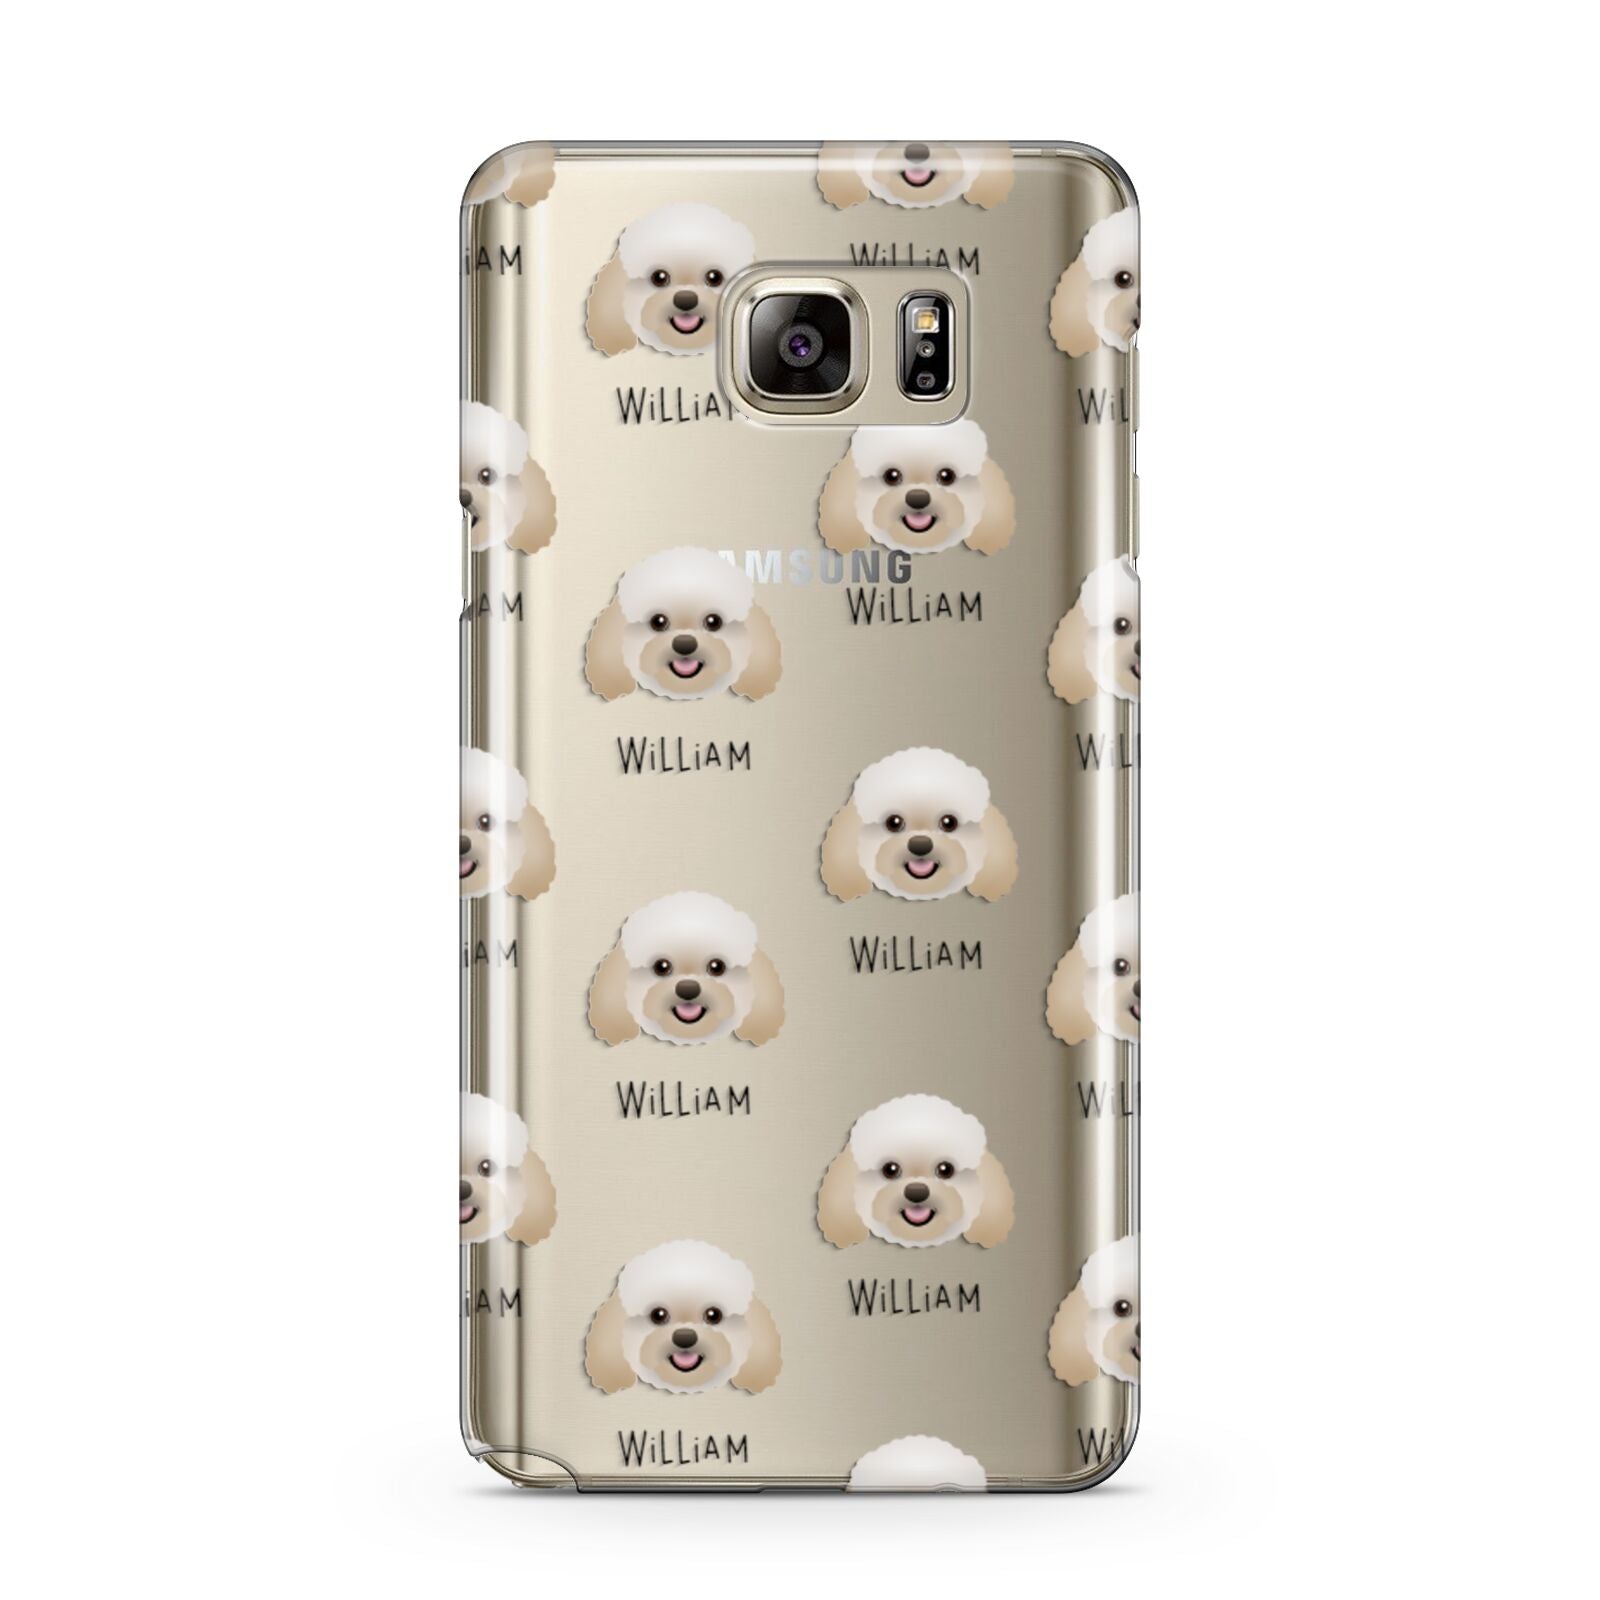 Bich poo Icon with Name Samsung Galaxy Note 5 Case